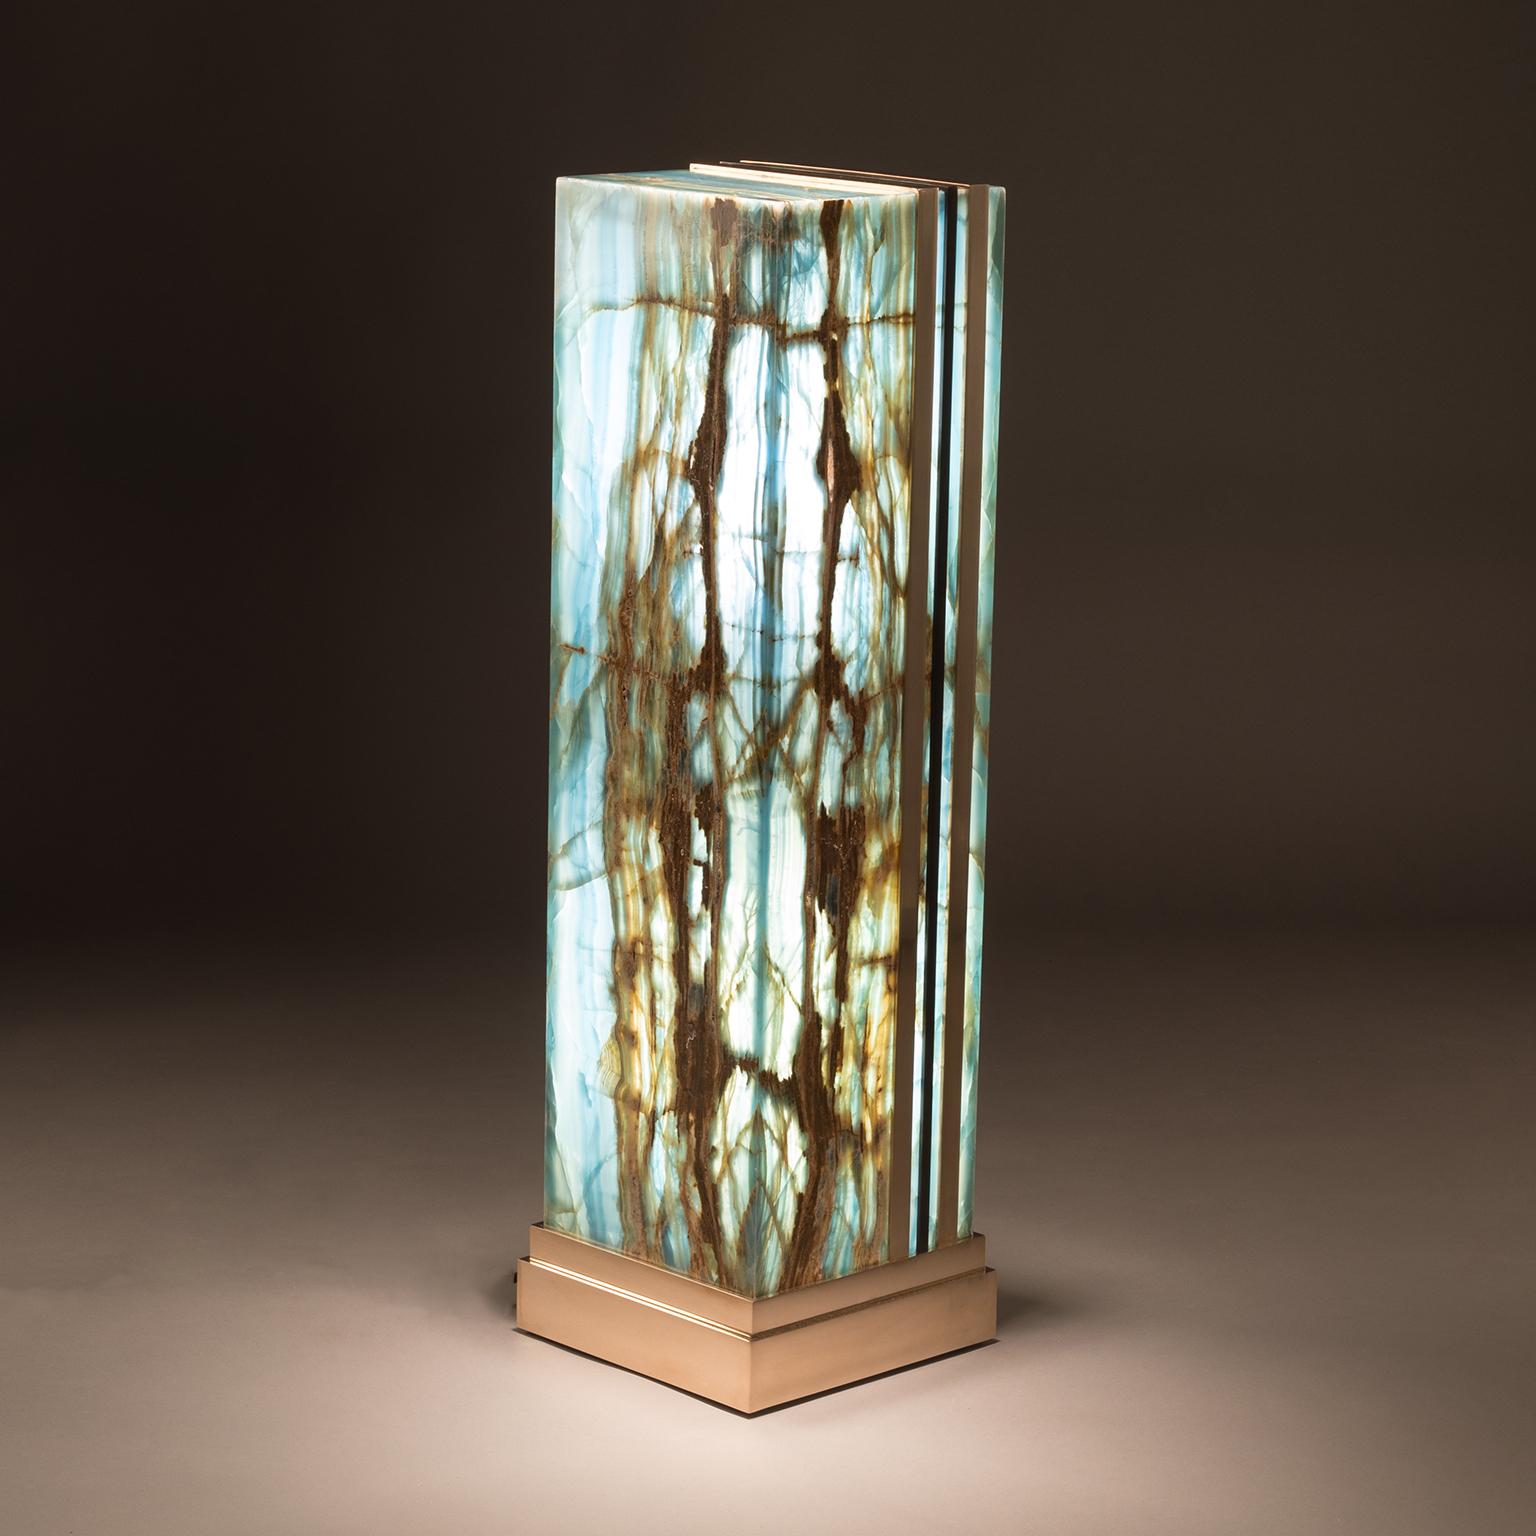 LARGE BLUE LEMANS GLO

Studio Greytak’s large blue Le Mans Glo calls to mind Degas’ dancers. Streaks of gold dance through a pillar of blue aragonite like ballerinas captured mid-arabesque. Inside, a soft glow hints at the graceful but ever-changing